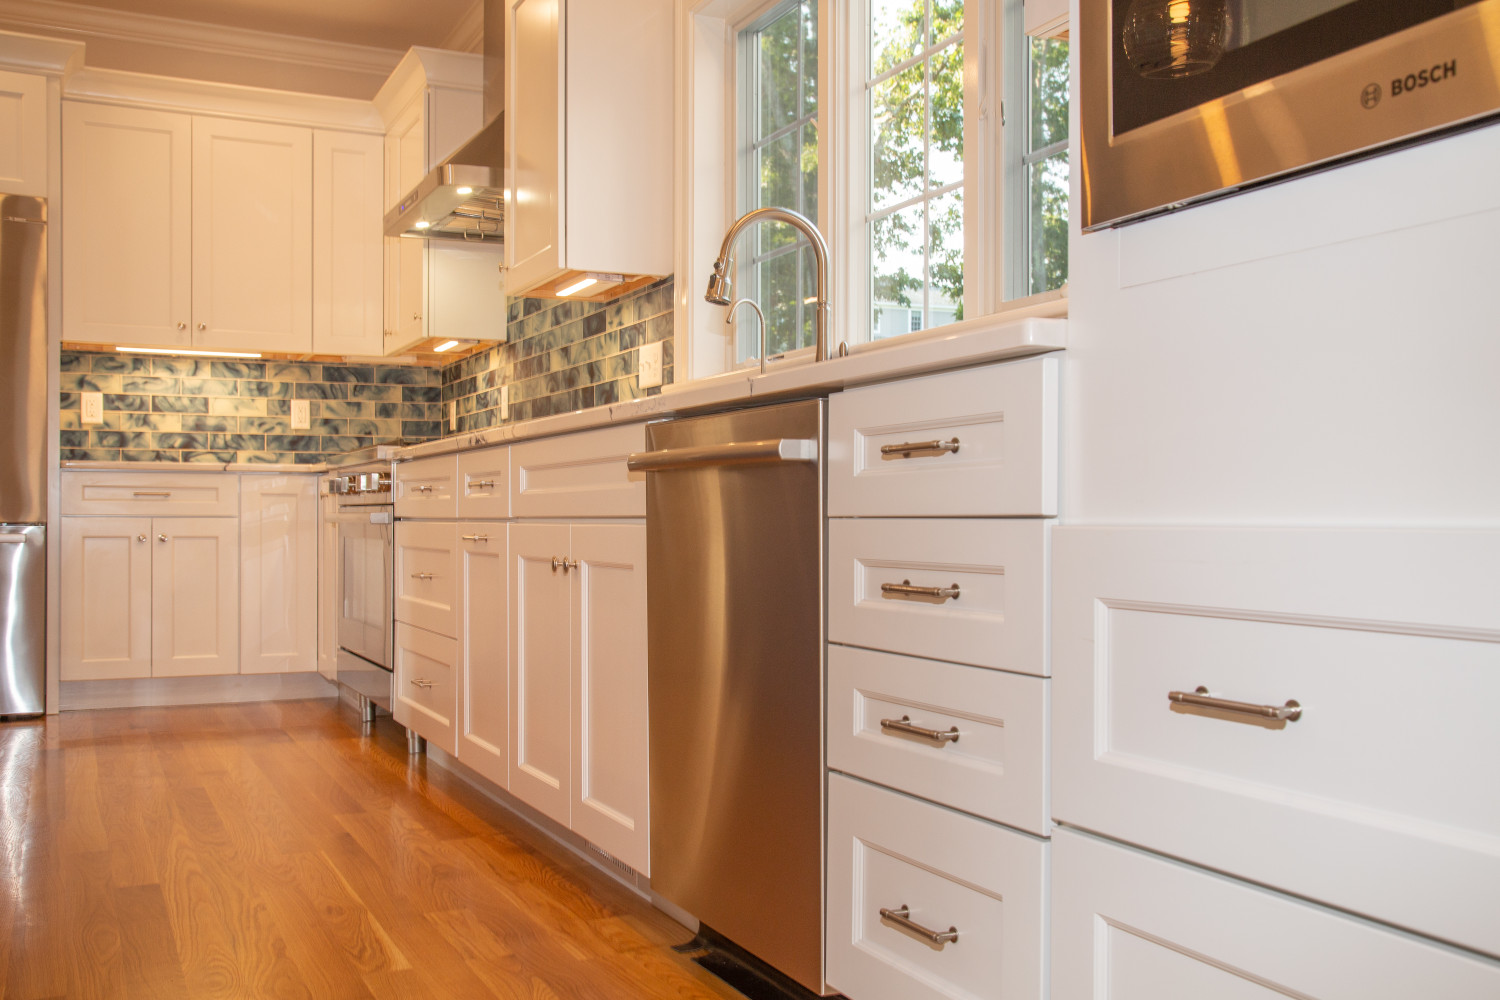 Closeup view of kitchen cabinets